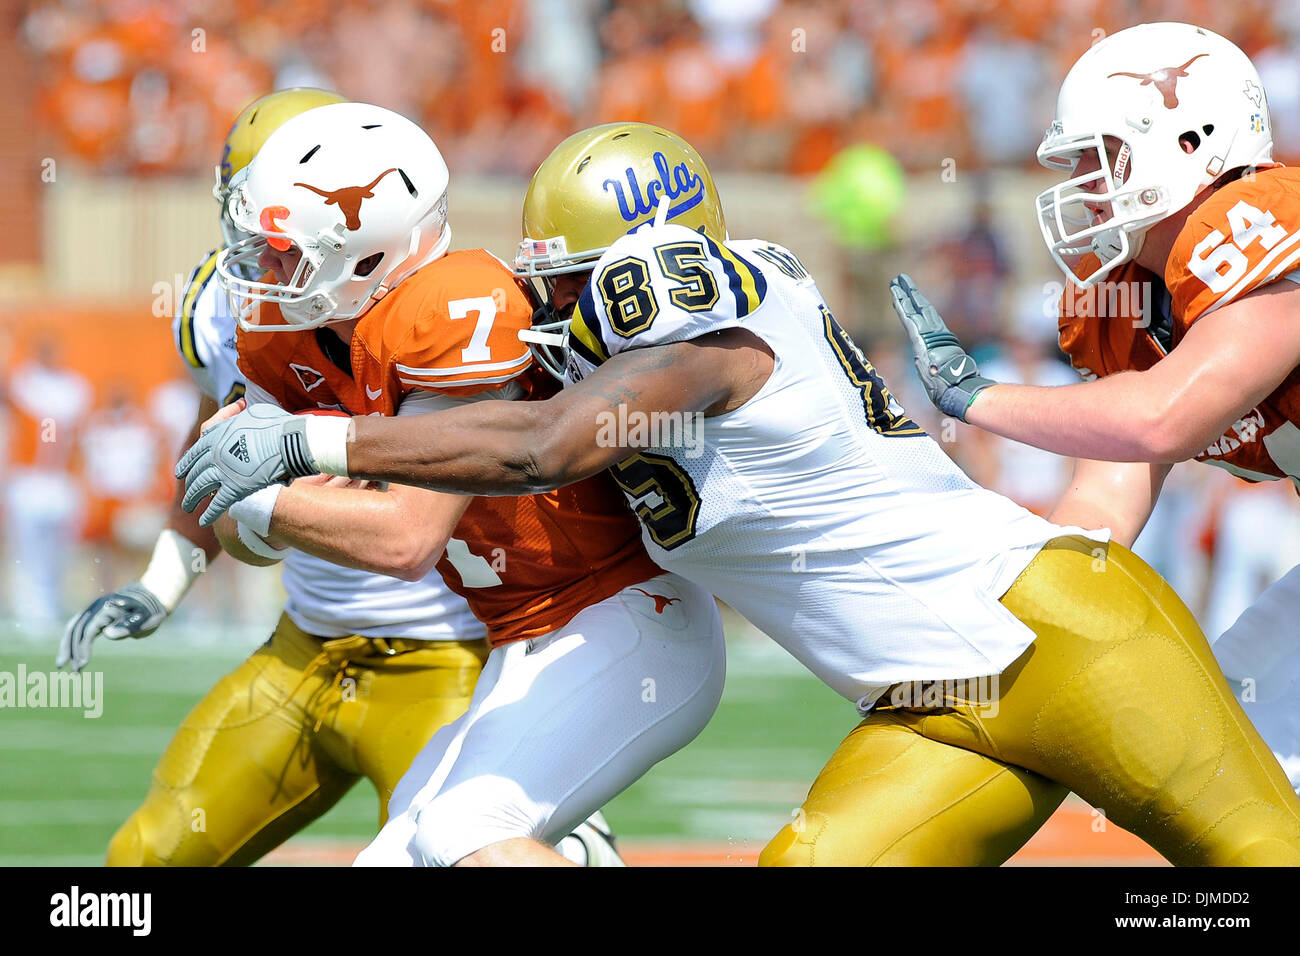 Sept. 25, 2010 - Austin, Texas, United States of America - Texas Longhorns quarterback Garrett Gilbert (7) is sacked by UCLA Bruins defensive tackle David Carter (85) during the game between the University of Texas and UCLA. The Bruins defeated the Longhorns 34-12. (Credit Image: © Jerome Miron/Southcreek Global/ZUMApress.com) Stock Photo